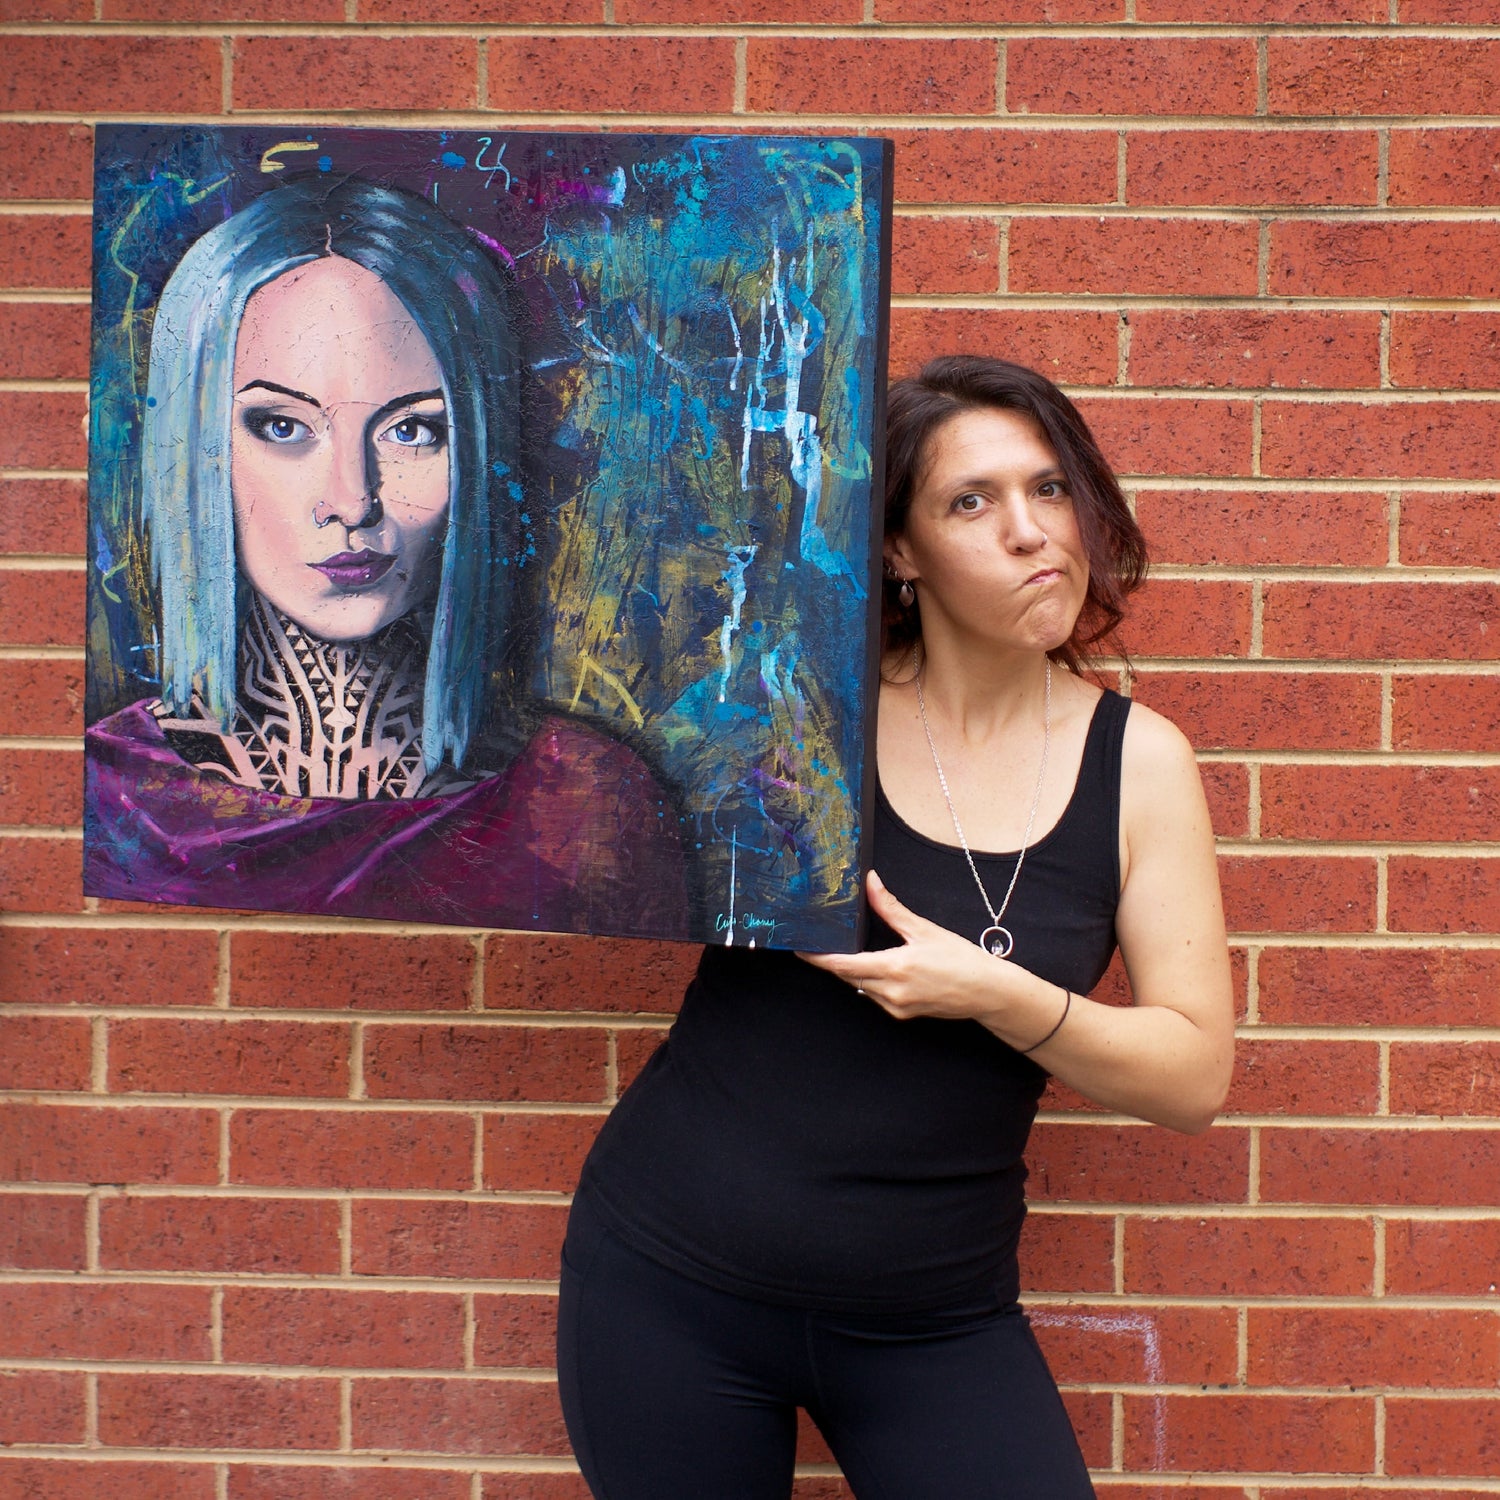 artist criss chaney with her painting of teya salat portrait of a woman with a neck tattoo